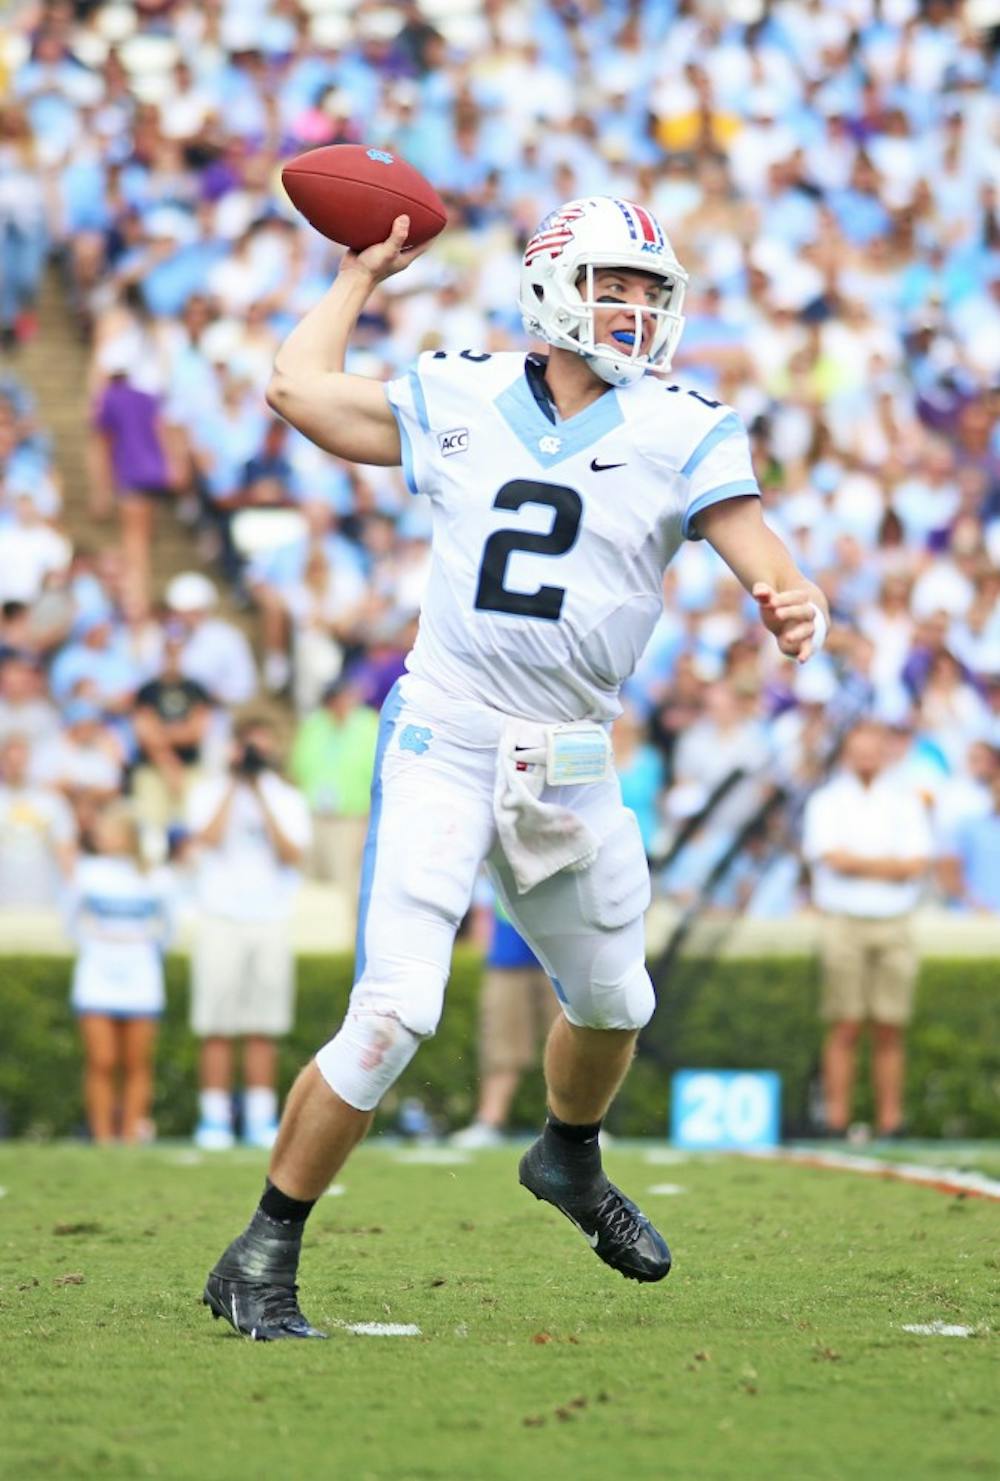 	UNC quarterback Bryn Renner (2) threw for a career high 366 yards, and also passed former UNC quarterback T.J. Yates.